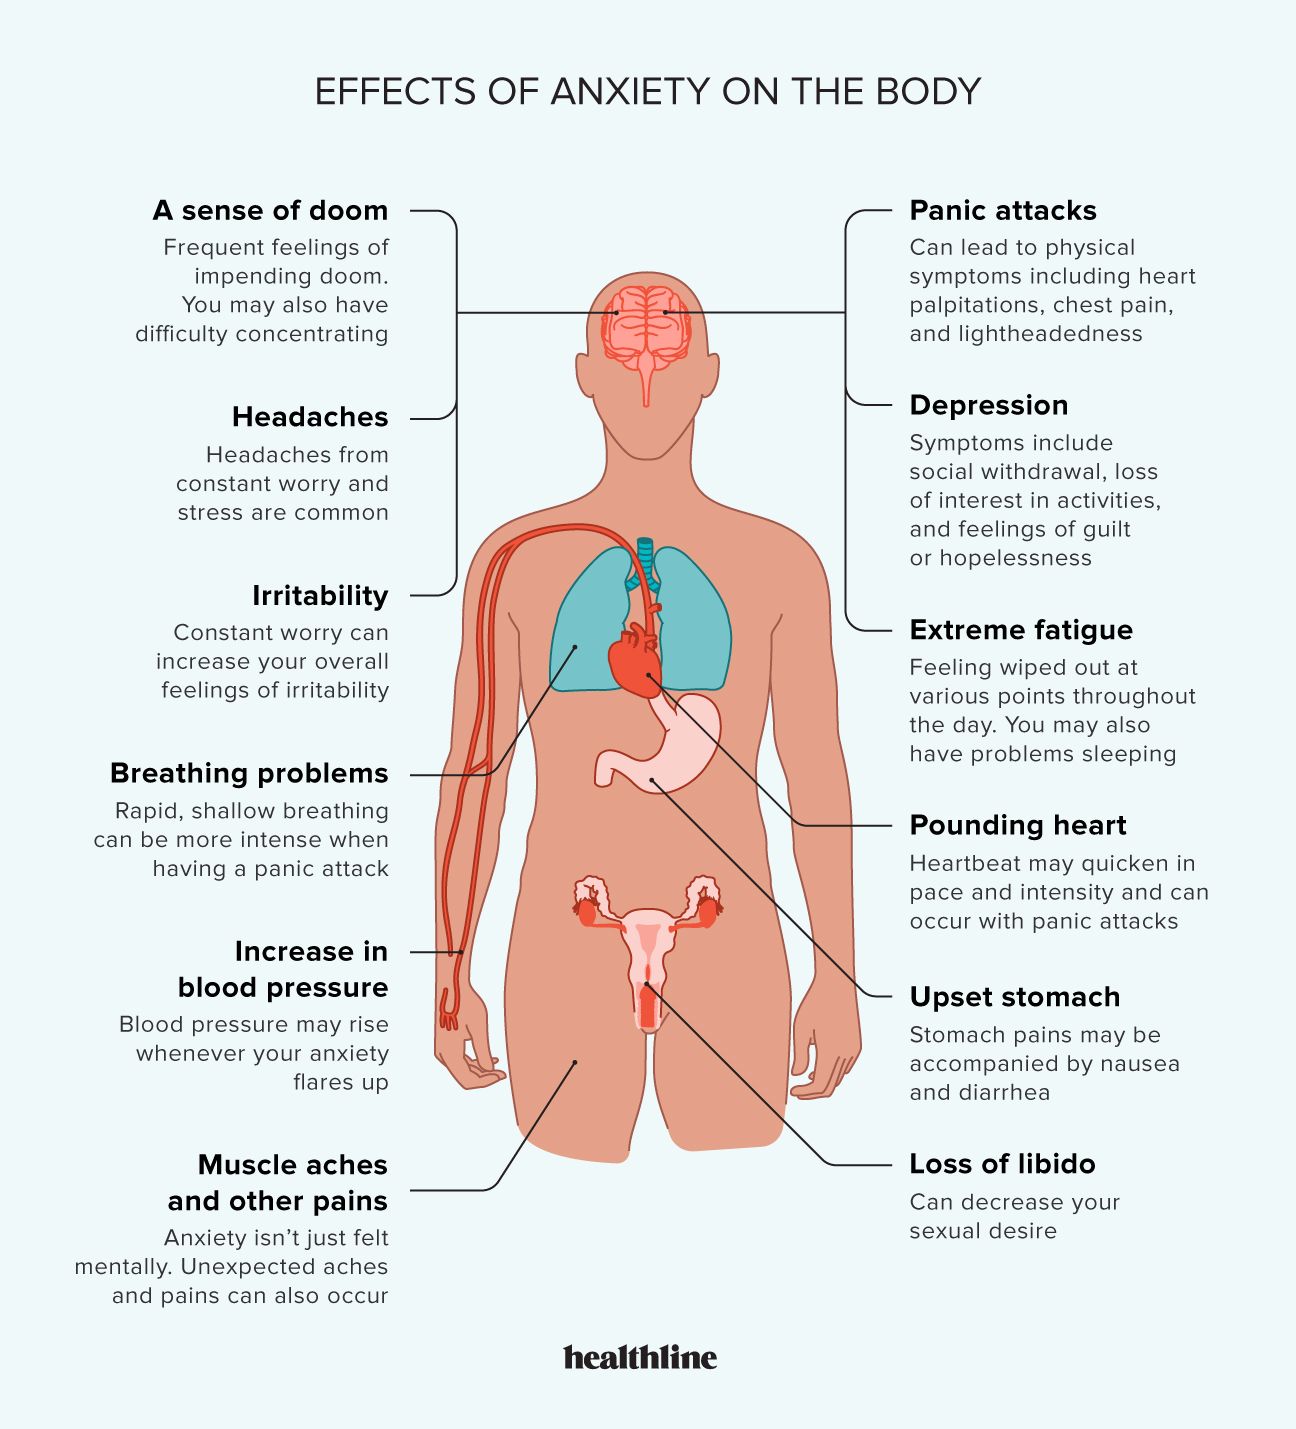 Effects of Anxiety on the Body